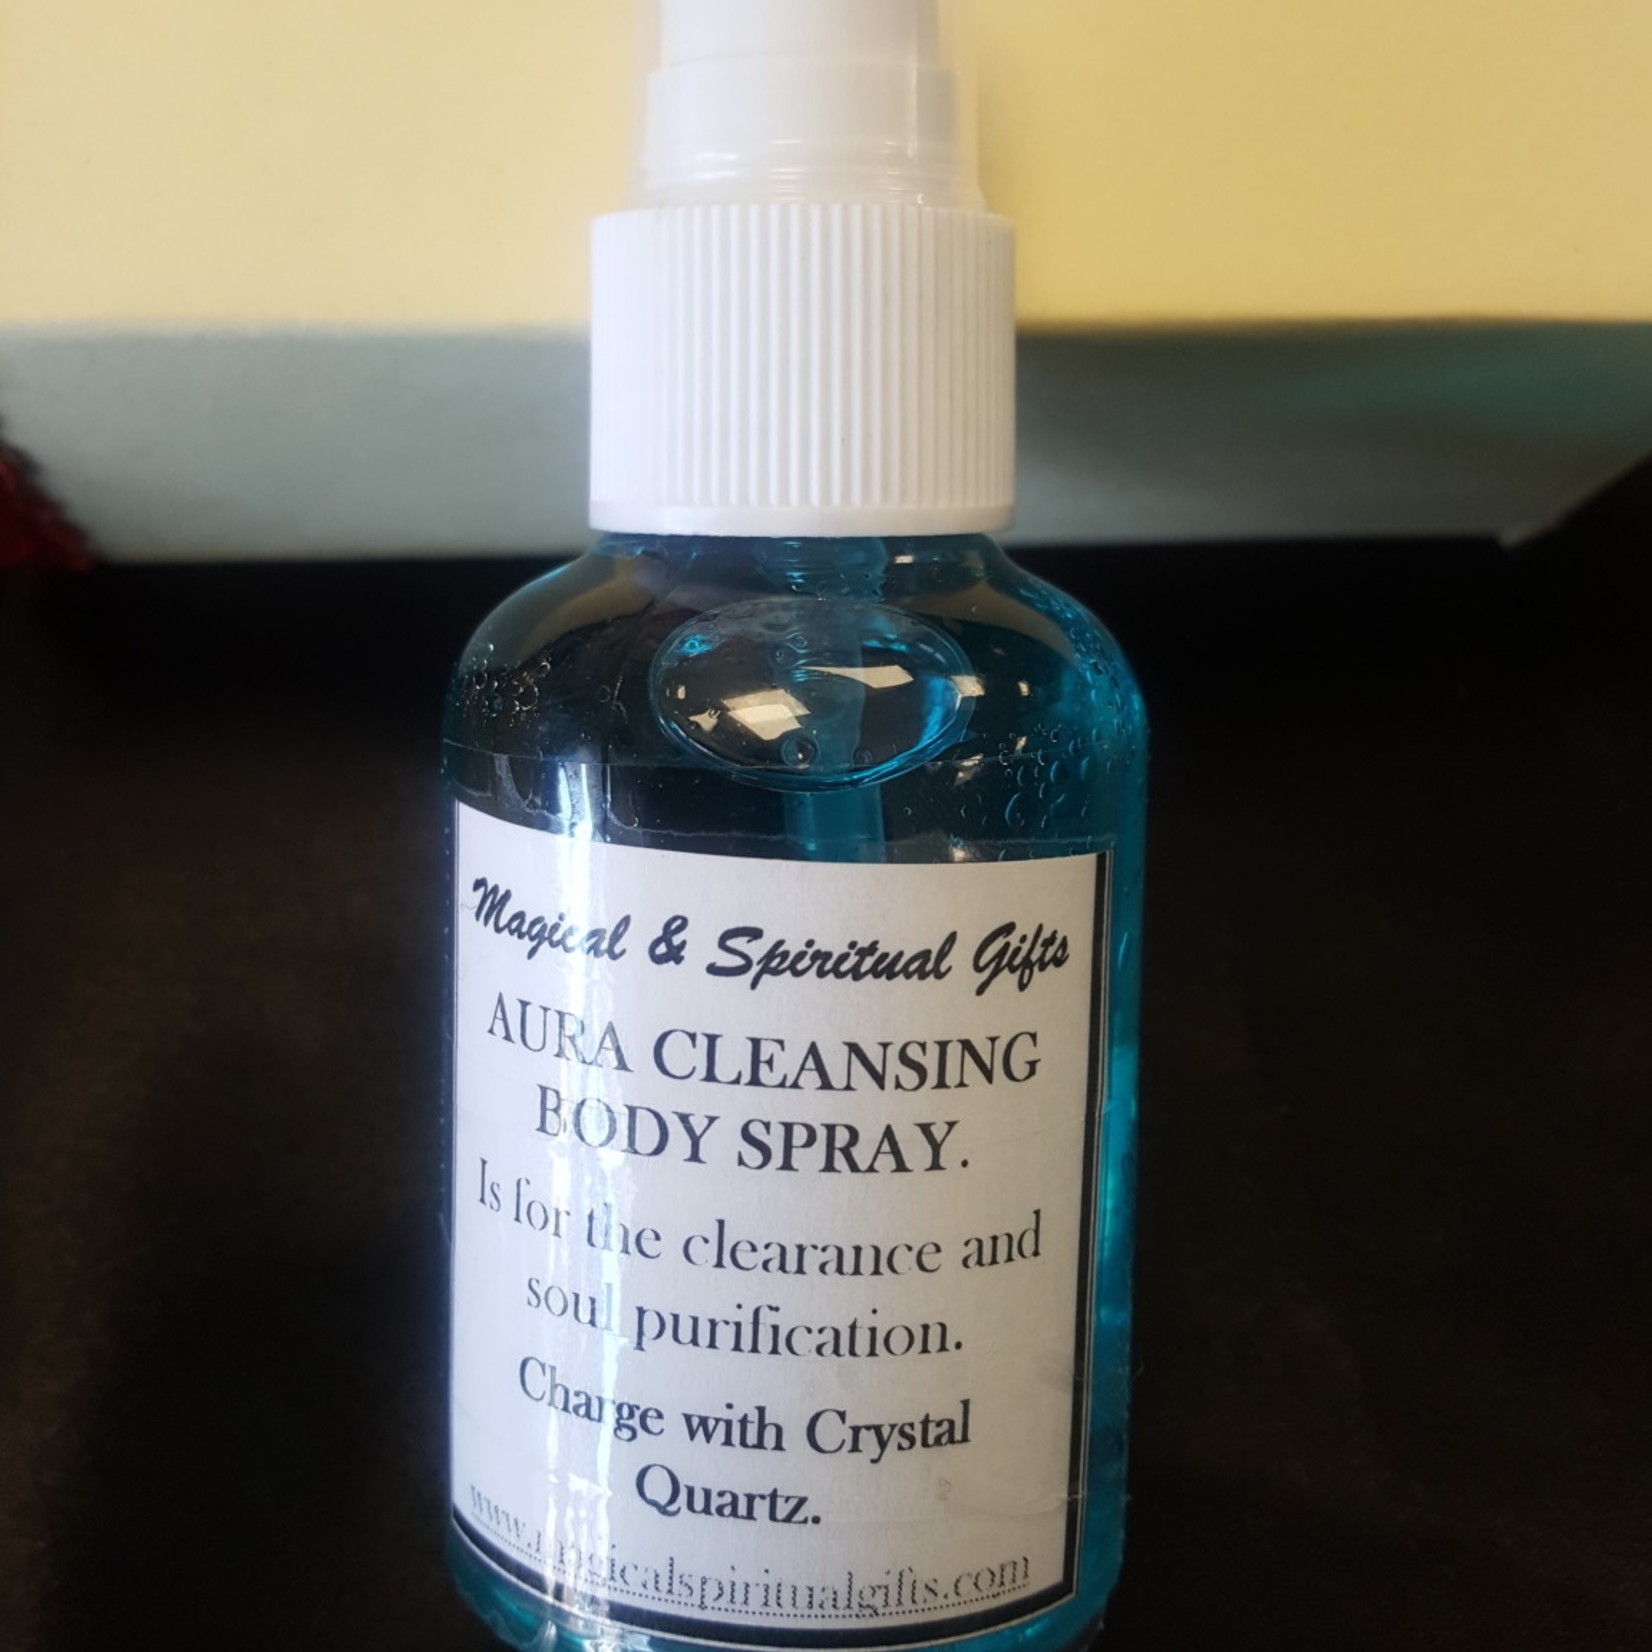 Aura Cleansing Body Spary